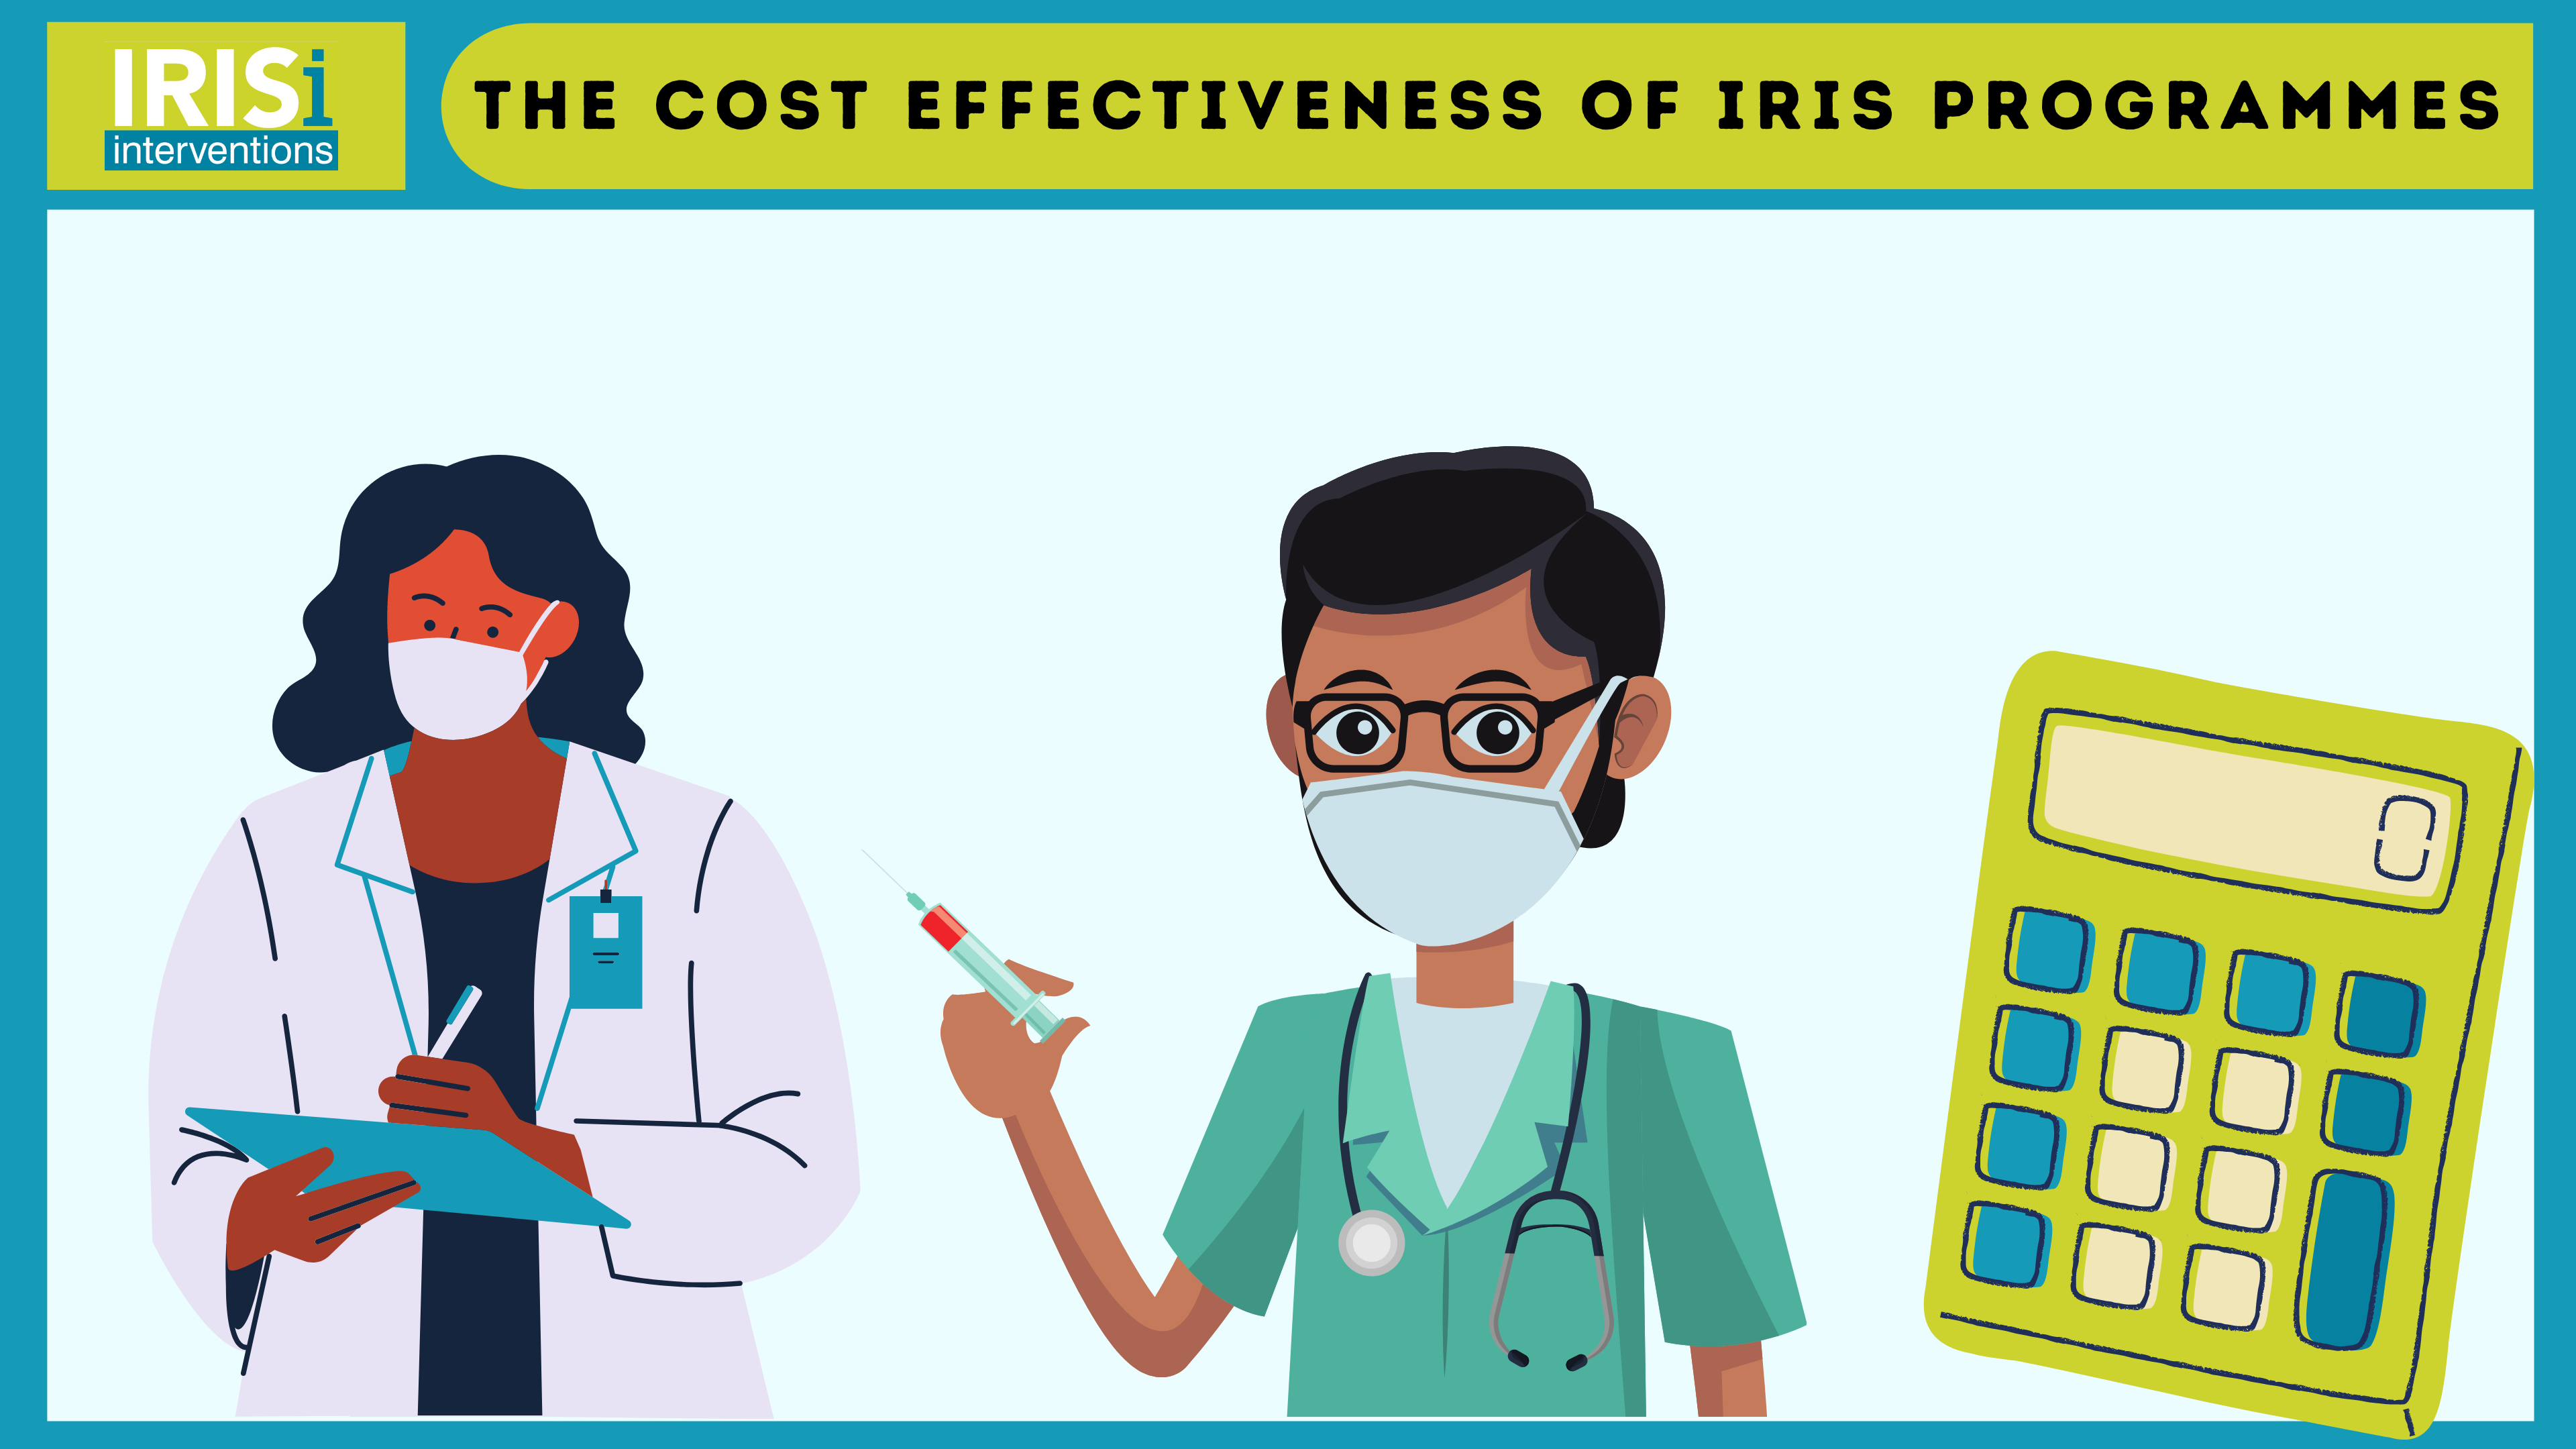 We often hear comments like “IRIS is expensive” or “We can’t afford IRIS”. To respond to this, we have produced a document to show the cost effectiveness of IRIS programmes.